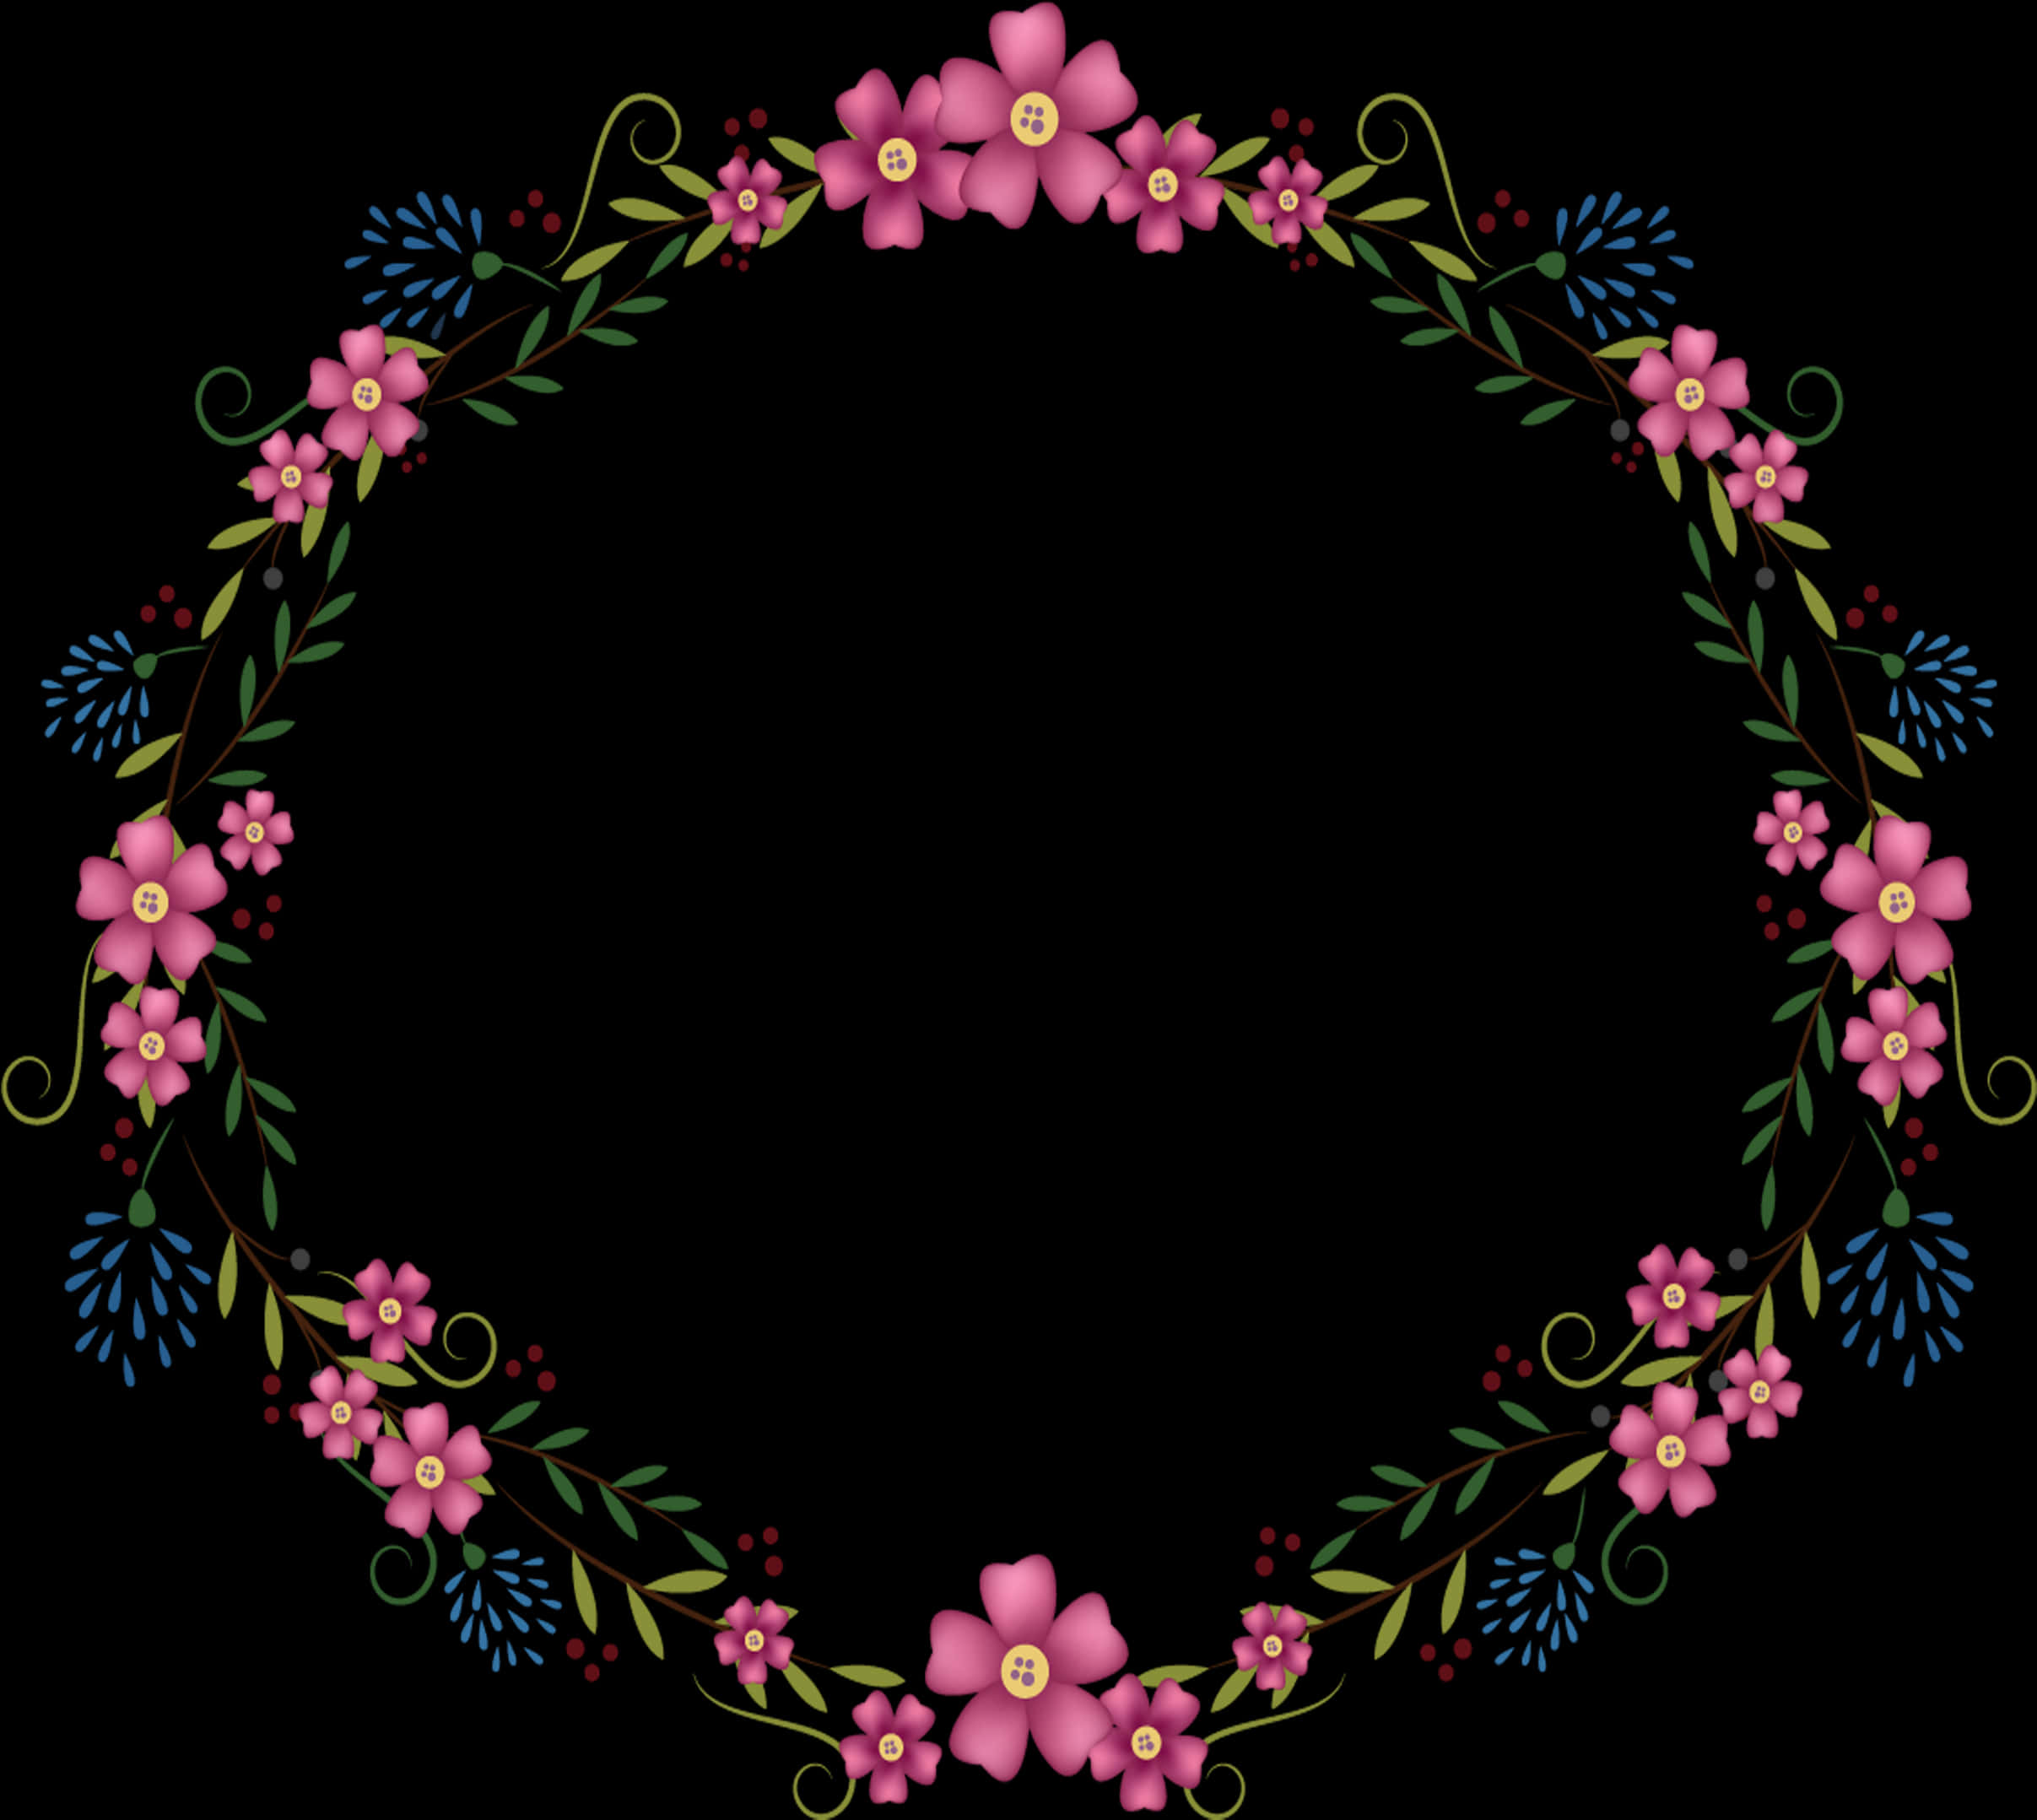 A Circular Floral Frame With Pink Flowers